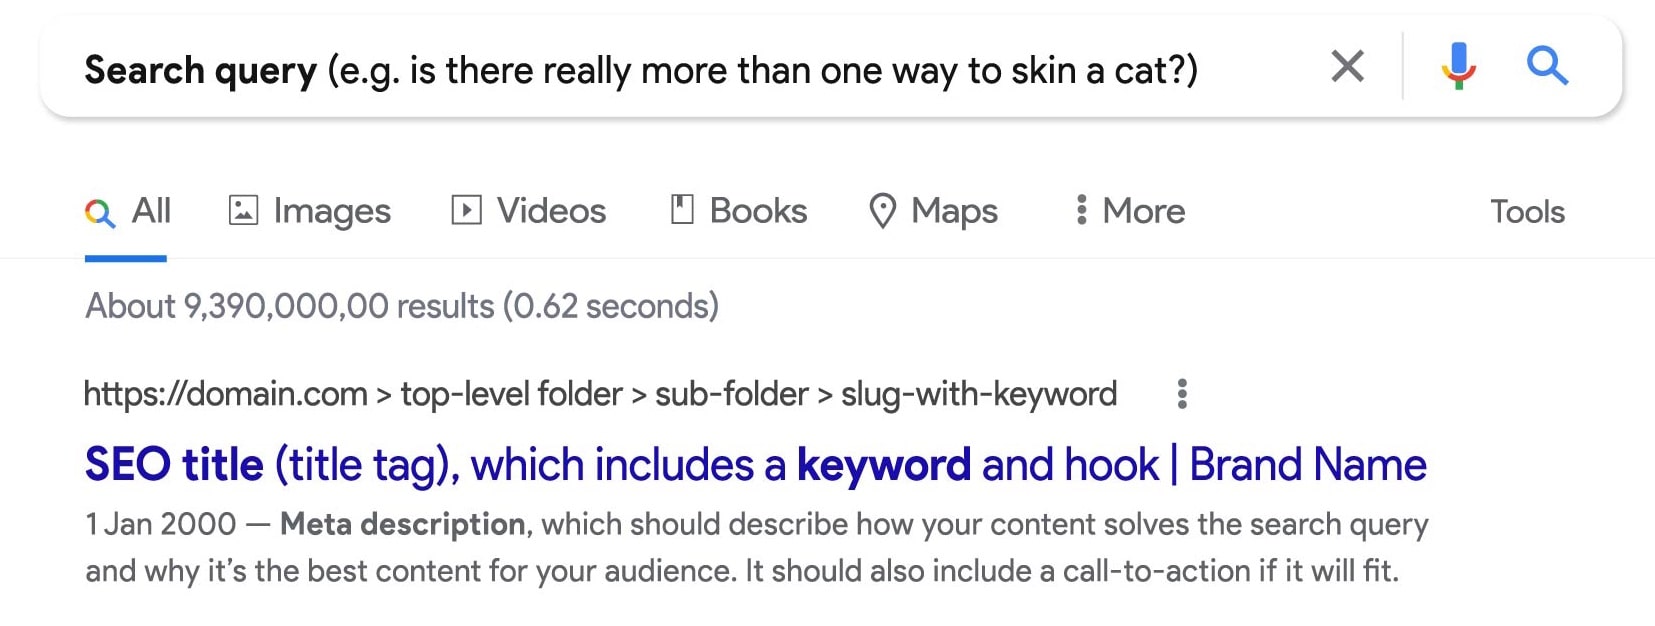 When you perform a web search, via Google, Bing, Ecosia or any other similar search engine, the description that shows up under the search listing heading is what you’re aiming to influence with a meta description.